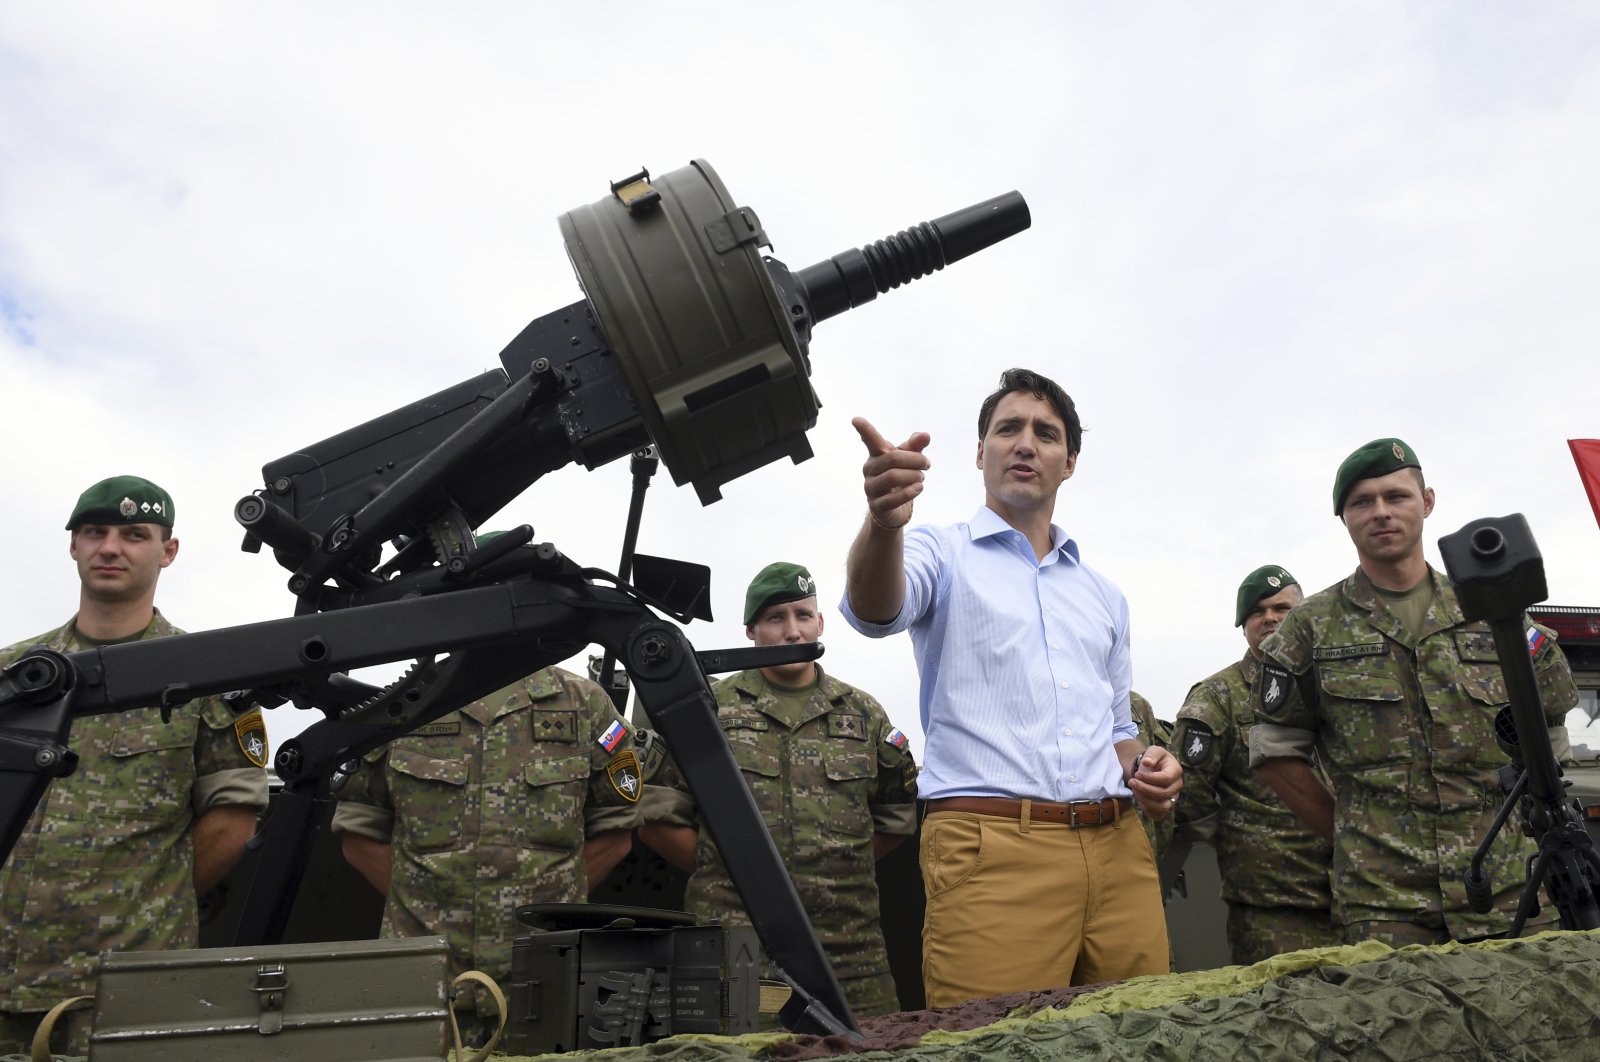 Canadian Prime Minister Justin Trudeau gestures while inspecting the troops as he visits Adazi Military Base in Kadaga, Latvia, July 10, 2018. (AP Photo)